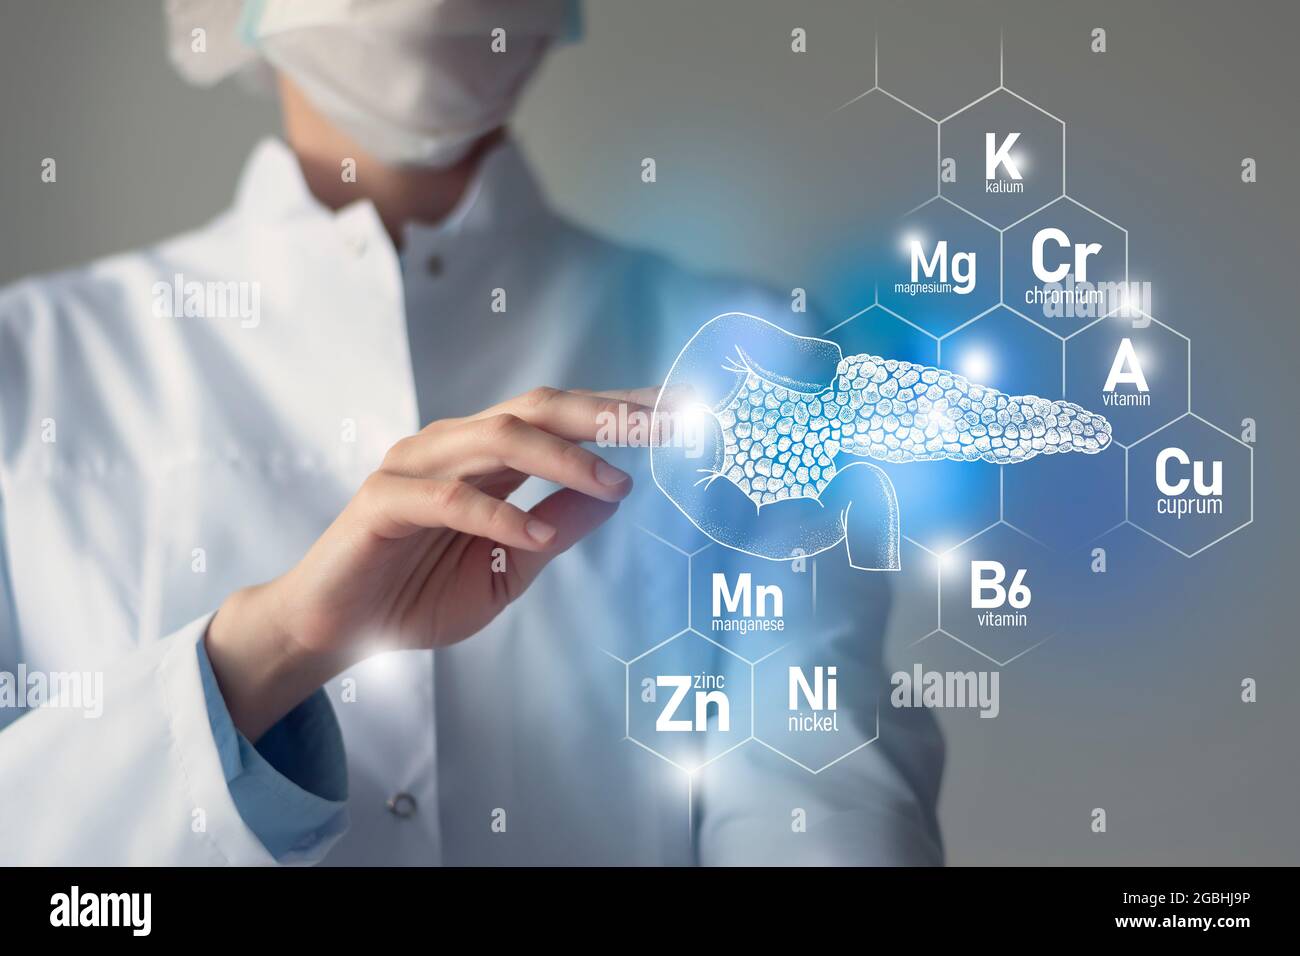 Essential nutrients for Pancreas health including Nickel, Chromium, Cuprum, Manganese. Blurred portrait of doctor holding highlighted blue Pancreas. Stock Photo